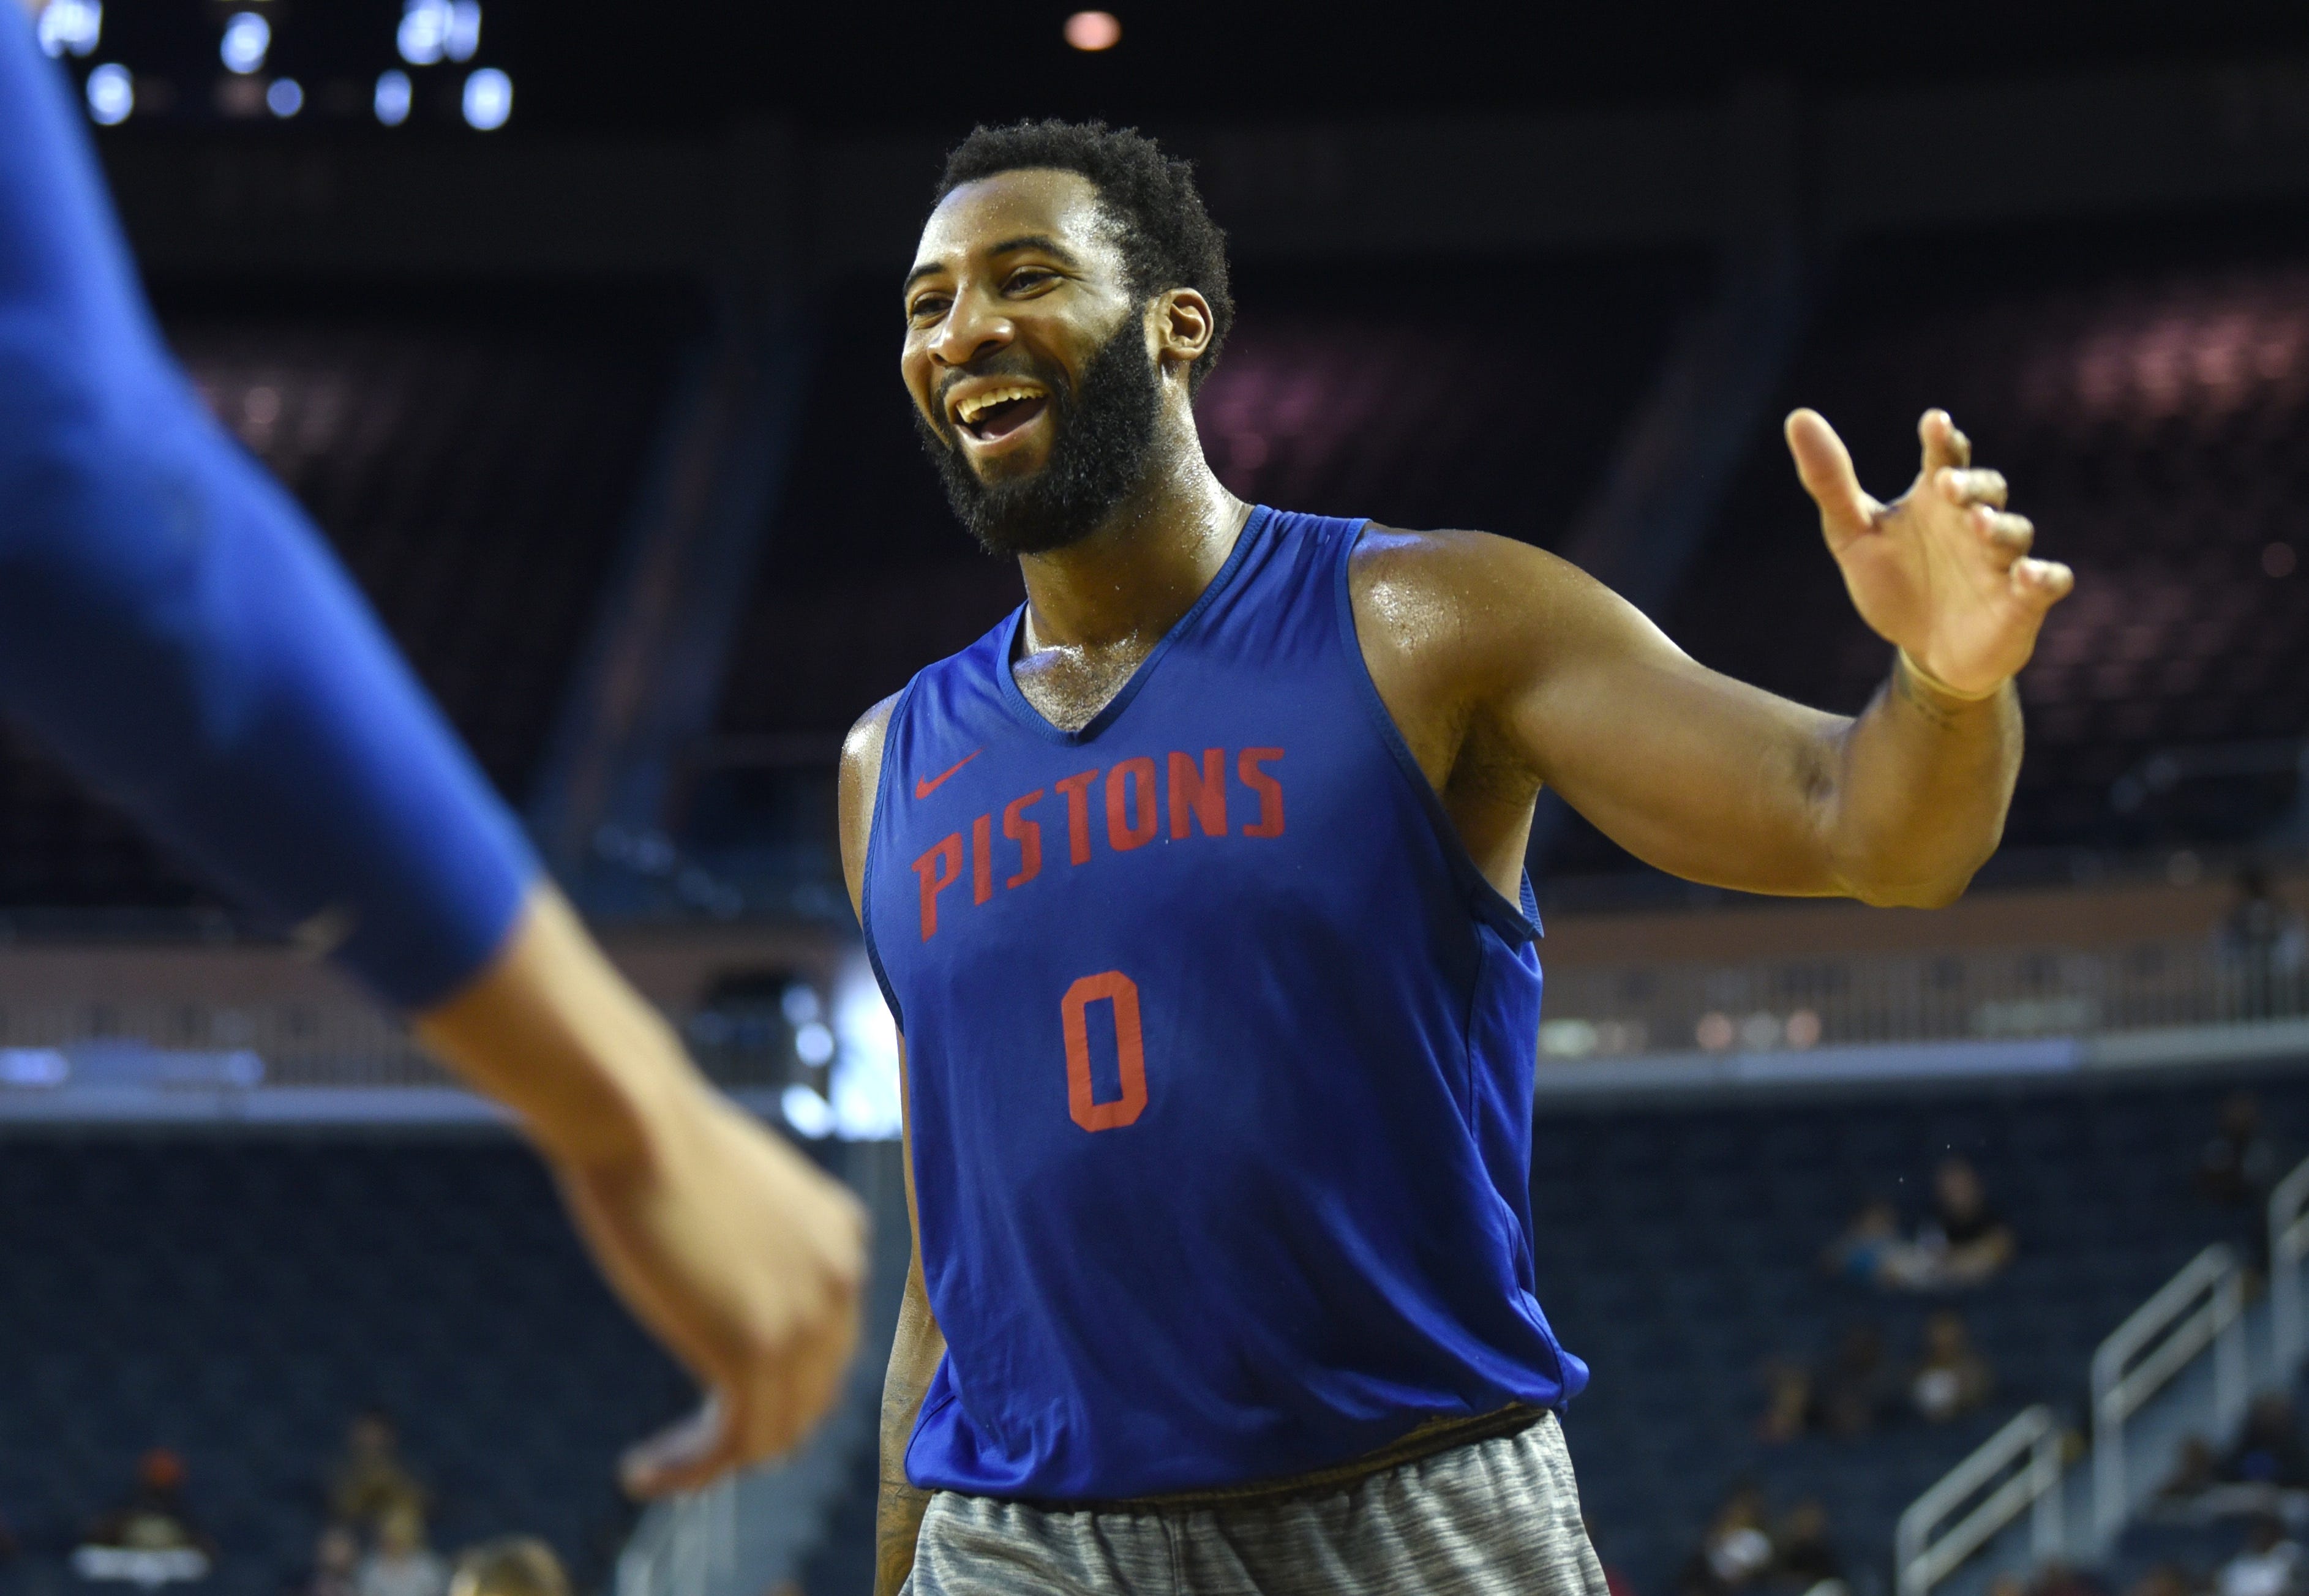 Pistons star Andre Drummond reacts in jubilation during open practice.